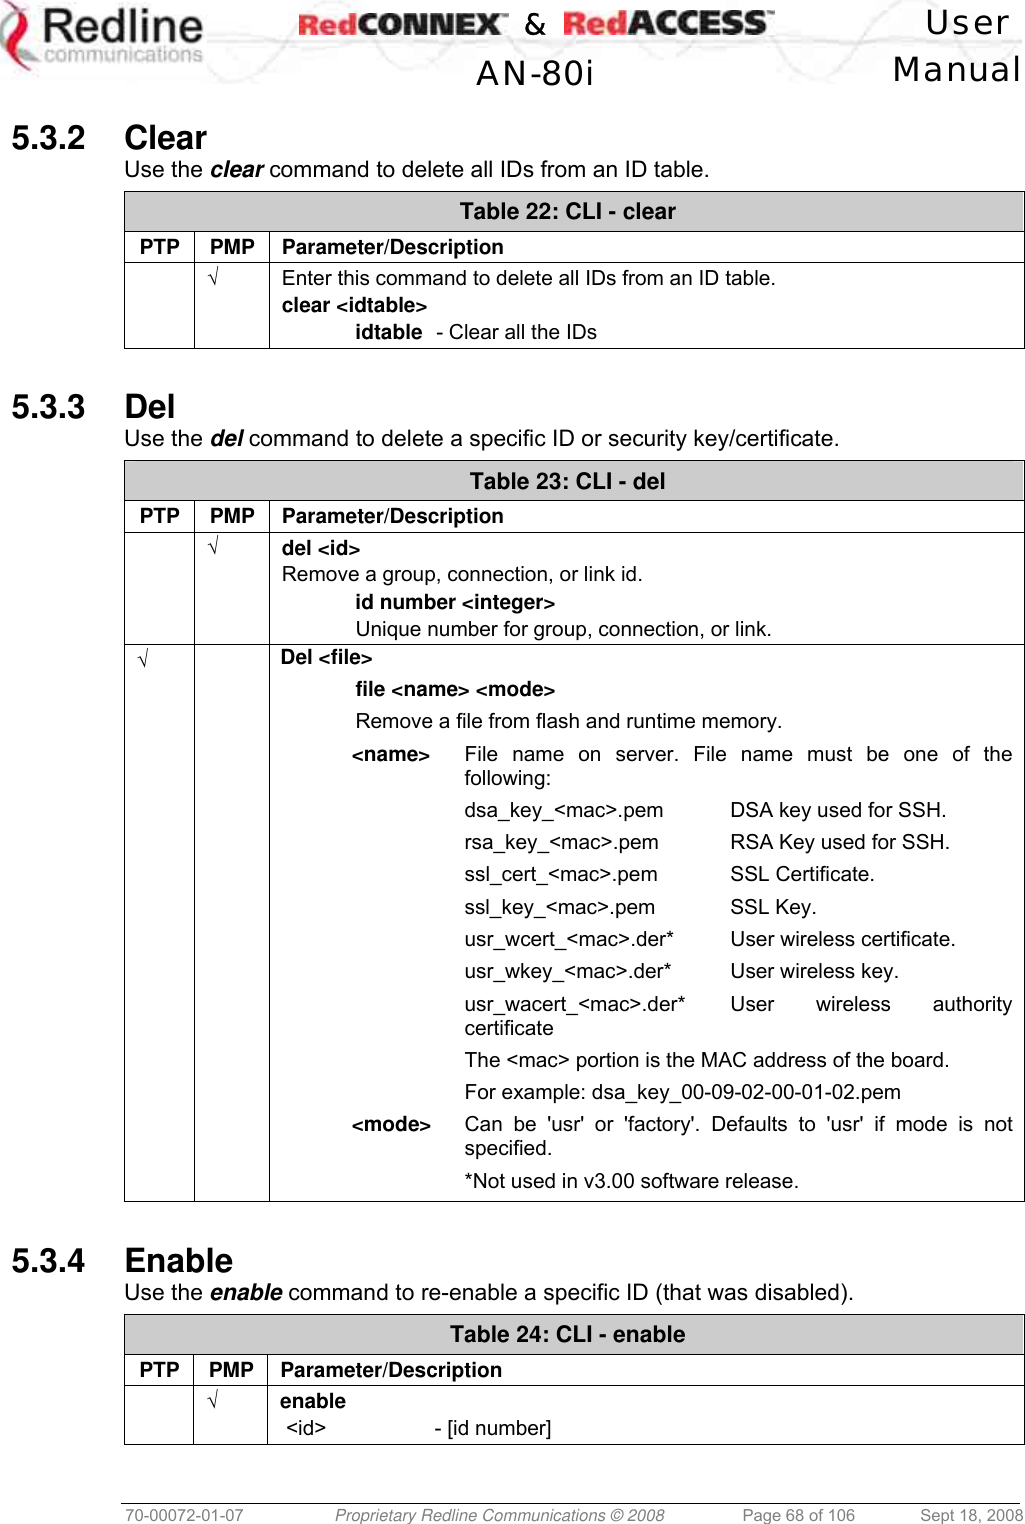    &amp;  User  AN-80i Manual  70-00072-01-07  Proprietary Redline Communications © 2008  Page 68 of 106  Sept 18, 2008  5.3.2 Clear Use the clear command to delete all IDs from an ID table. Table 22: CLI - clear PTP PMP Parameter/Description  √  Enter this command to delete all IDs from an ID table. clear &lt;idtable&gt;  idtable  - Clear all the IDs  5.3.3 Del Use the del command to delete a specific ID or security key/certificate. Table 23: CLI - del PTP PMP Parameter/Description  √ del &lt;id&gt; Remove a group, connection, or link id.  id number &lt;integer&gt;   Unique number for group, connection, or link. √   Del &lt;file&gt;  file &lt;name&gt; &lt;mode&gt;    Remove a file from flash and runtime memory. &lt;name&gt;  File name on server. File name must be one of the following: dsa_key_&lt;mac&gt;.pem  DSA key used for SSH. rsa_key_&lt;mac&gt;.pem RSA Key used for SSH. ssl_cert_&lt;mac&gt;.pem SSL Certificate. ssl_key_&lt;mac&gt;.pem SSL Key. usr_wcert_&lt;mac&gt;.der*  User wireless certificate. usr_wkey_&lt;mac&gt;.der*  User wireless key. usr_wacert_&lt;mac&gt;.der*  User wireless authority certificate The &lt;mac&gt; portion is the MAC address of the board. For example: dsa_key_00-09-02-00-01-02.pem &lt;mode&gt;  Can be &apos;usr&apos; or &apos;factory&apos;. Defaults to &apos;usr&apos; if mode is not specified.   *Not used in v3.00 software release.  5.3.4 Enable Use the enable command to re-enable a specific ID (that was disabled). Table 24: CLI - enable PTP PMP Parameter/Description  √ enable  &lt;id&gt;     - [id number]   